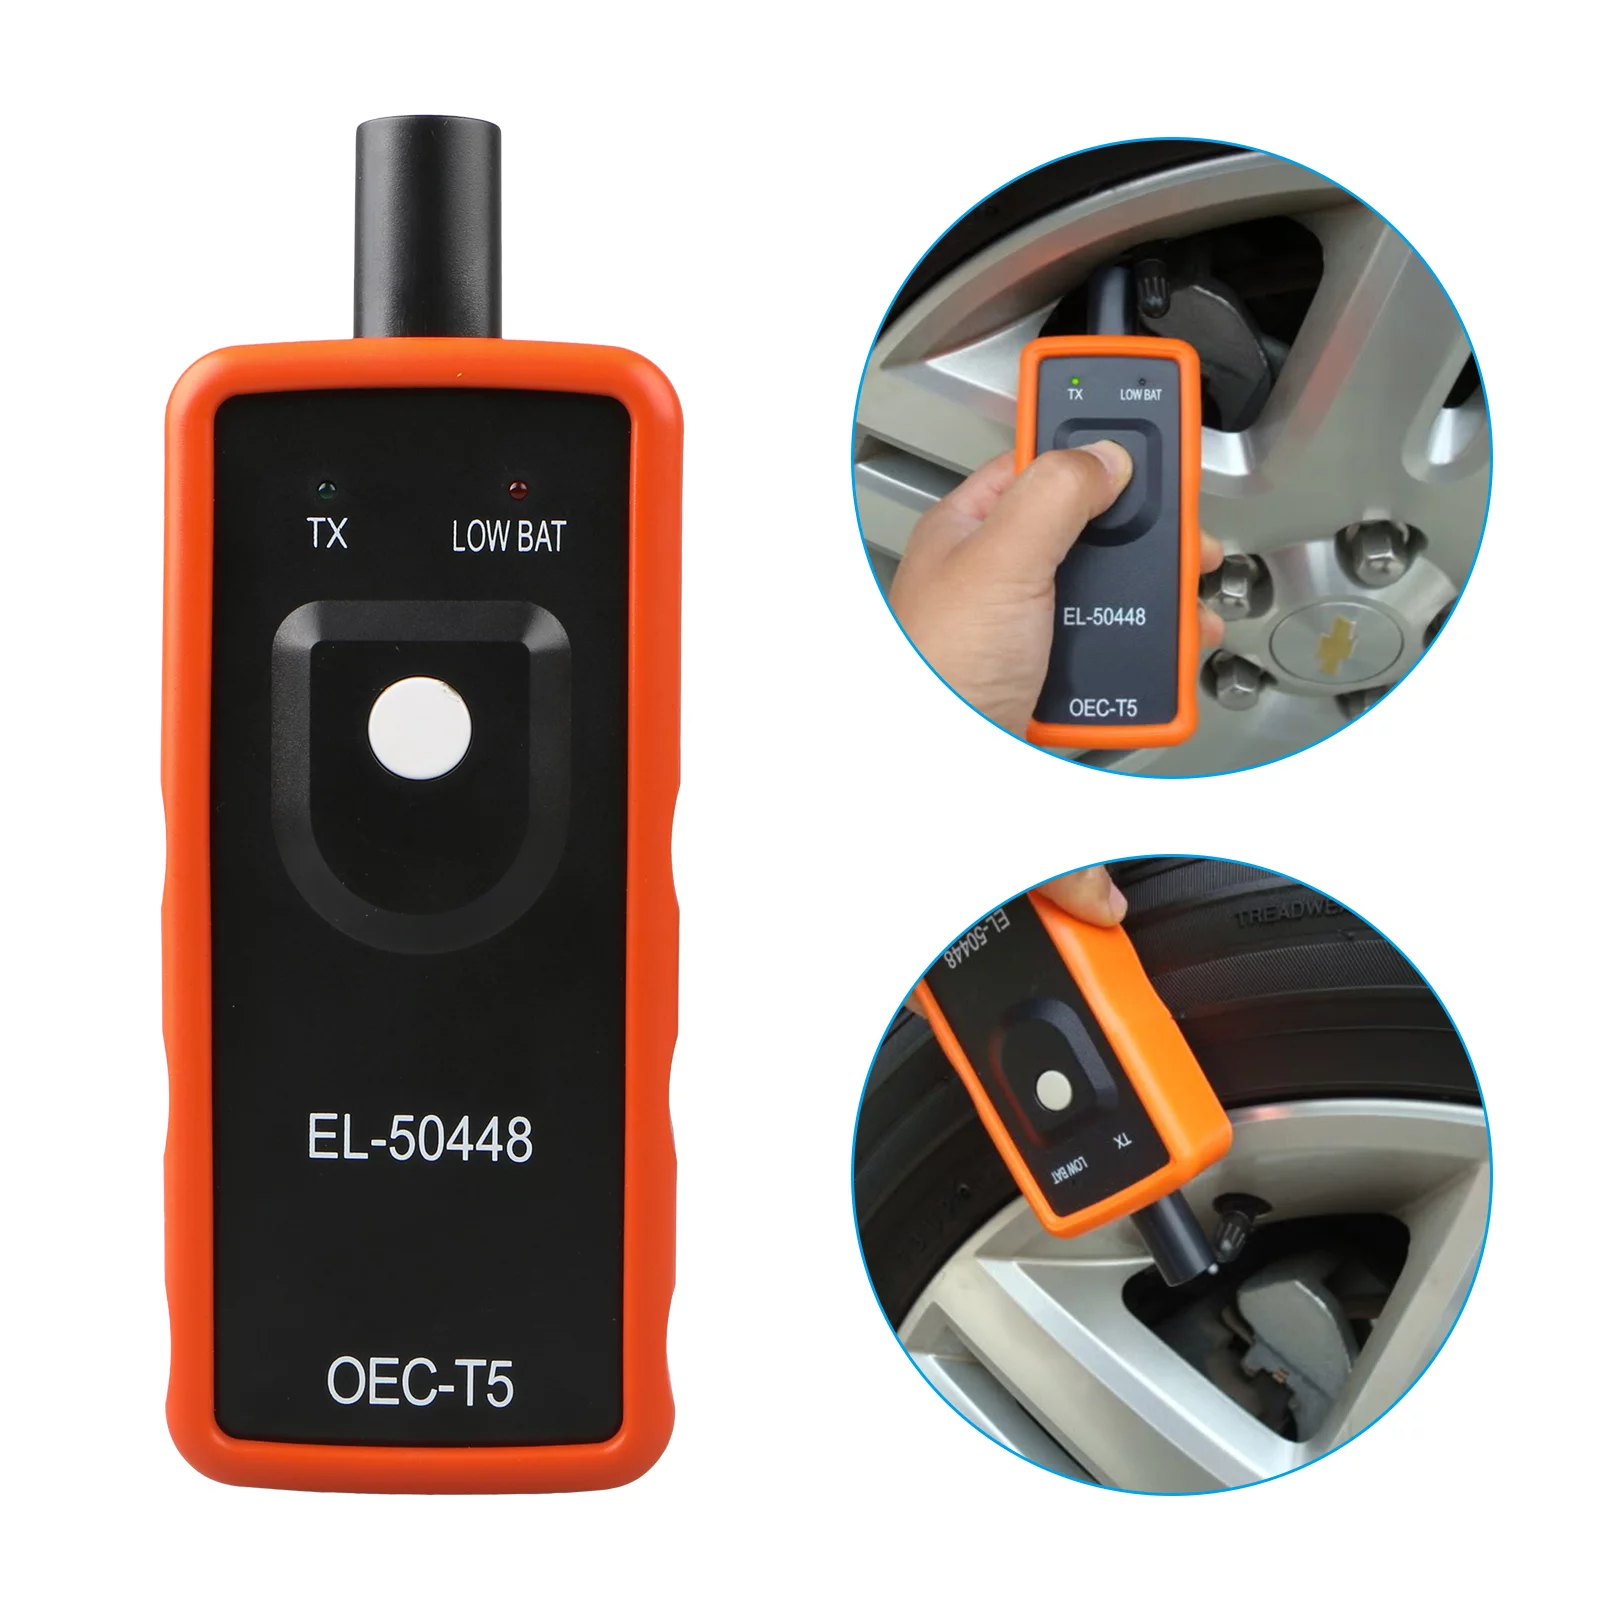 image 0 of TSV EL-50448 TPMS Relearn Reset Auto Tire Pressure Monitor Sensor TPMS Activation Tool OEC-T5 for GM Series Vehicles.